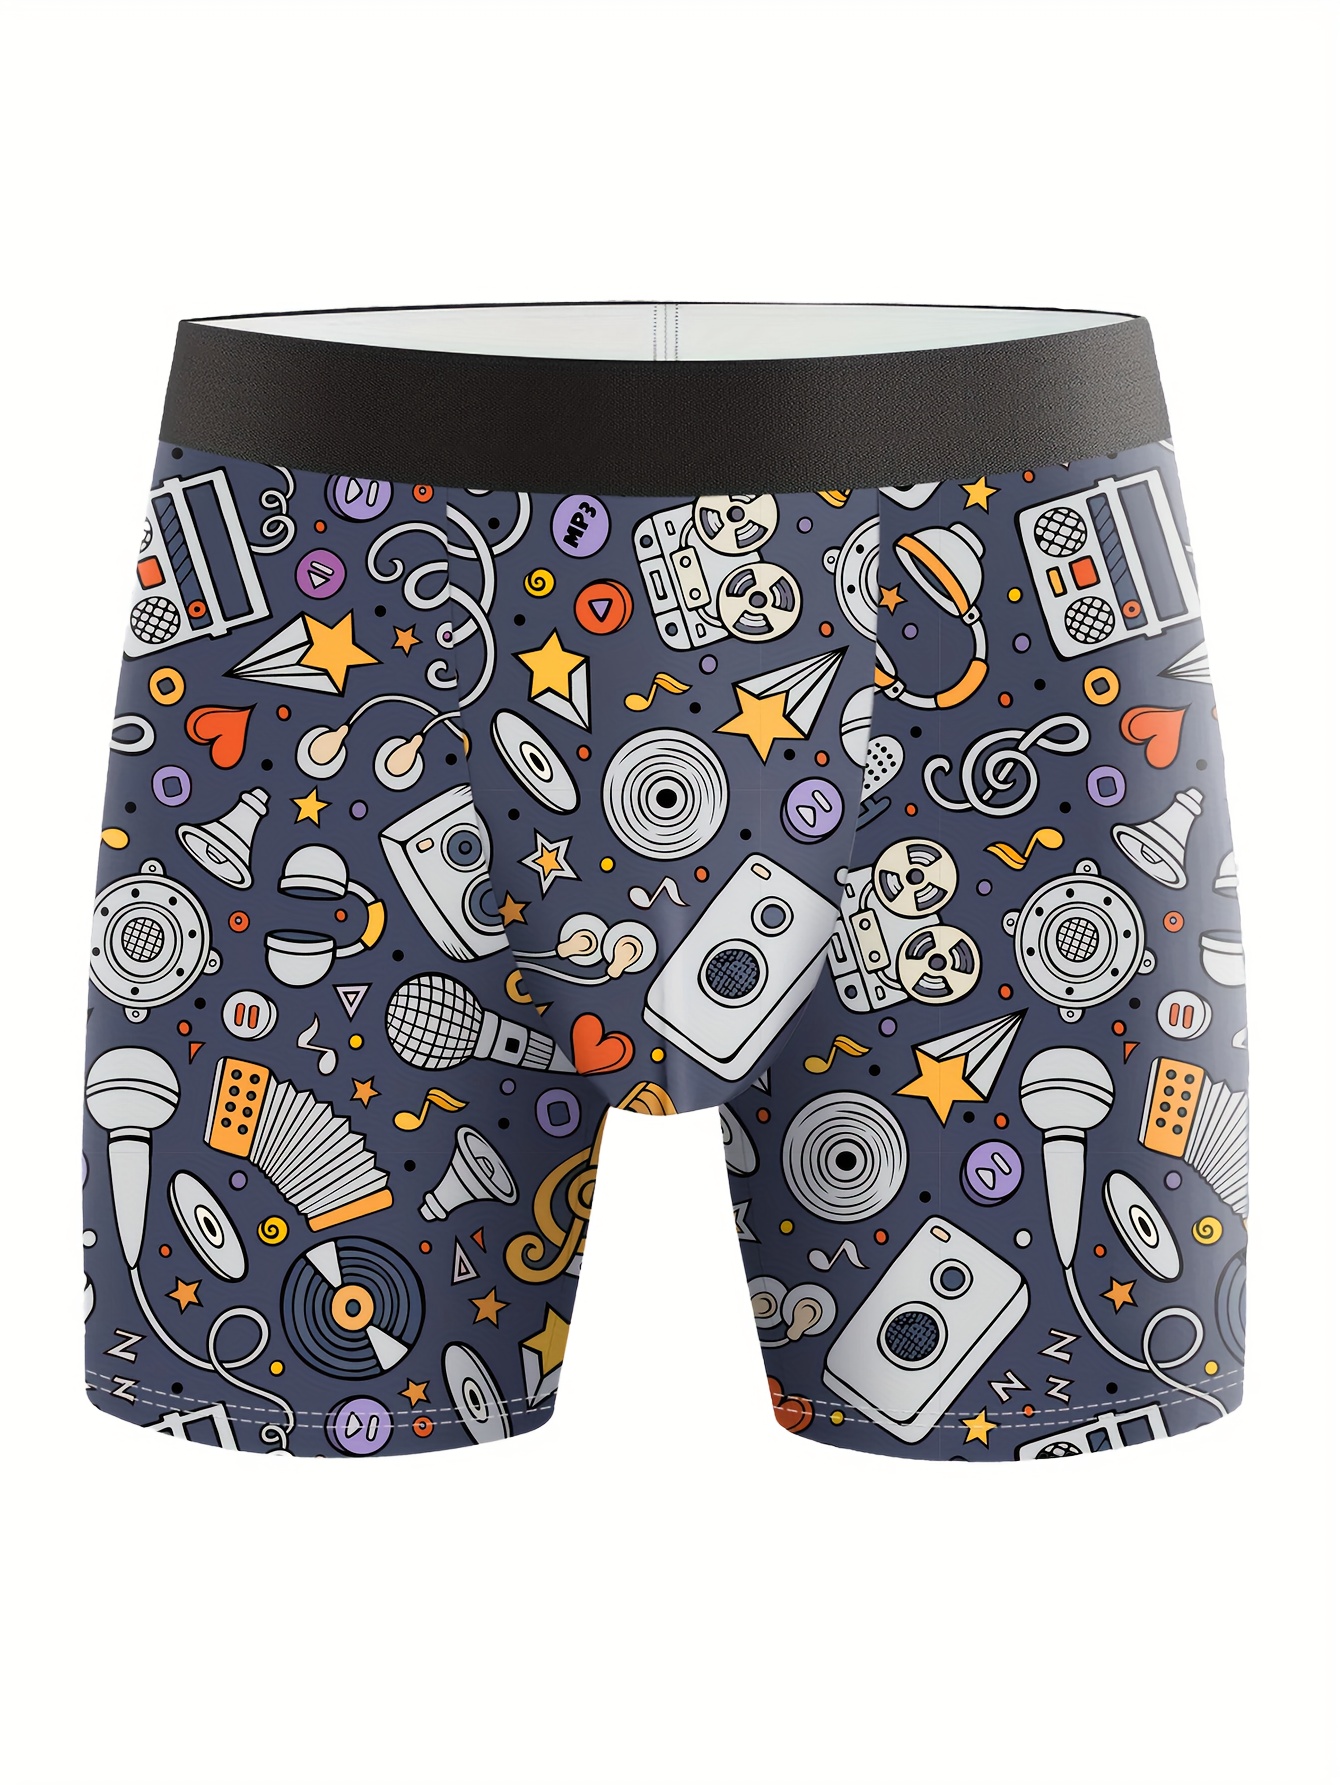 Men's Underwear, New Year Gifts, Cartoon Print Cotton Breathable Soft Comfy  Stretchy Boxer Briefs Shorts, Underpants For Men Teen